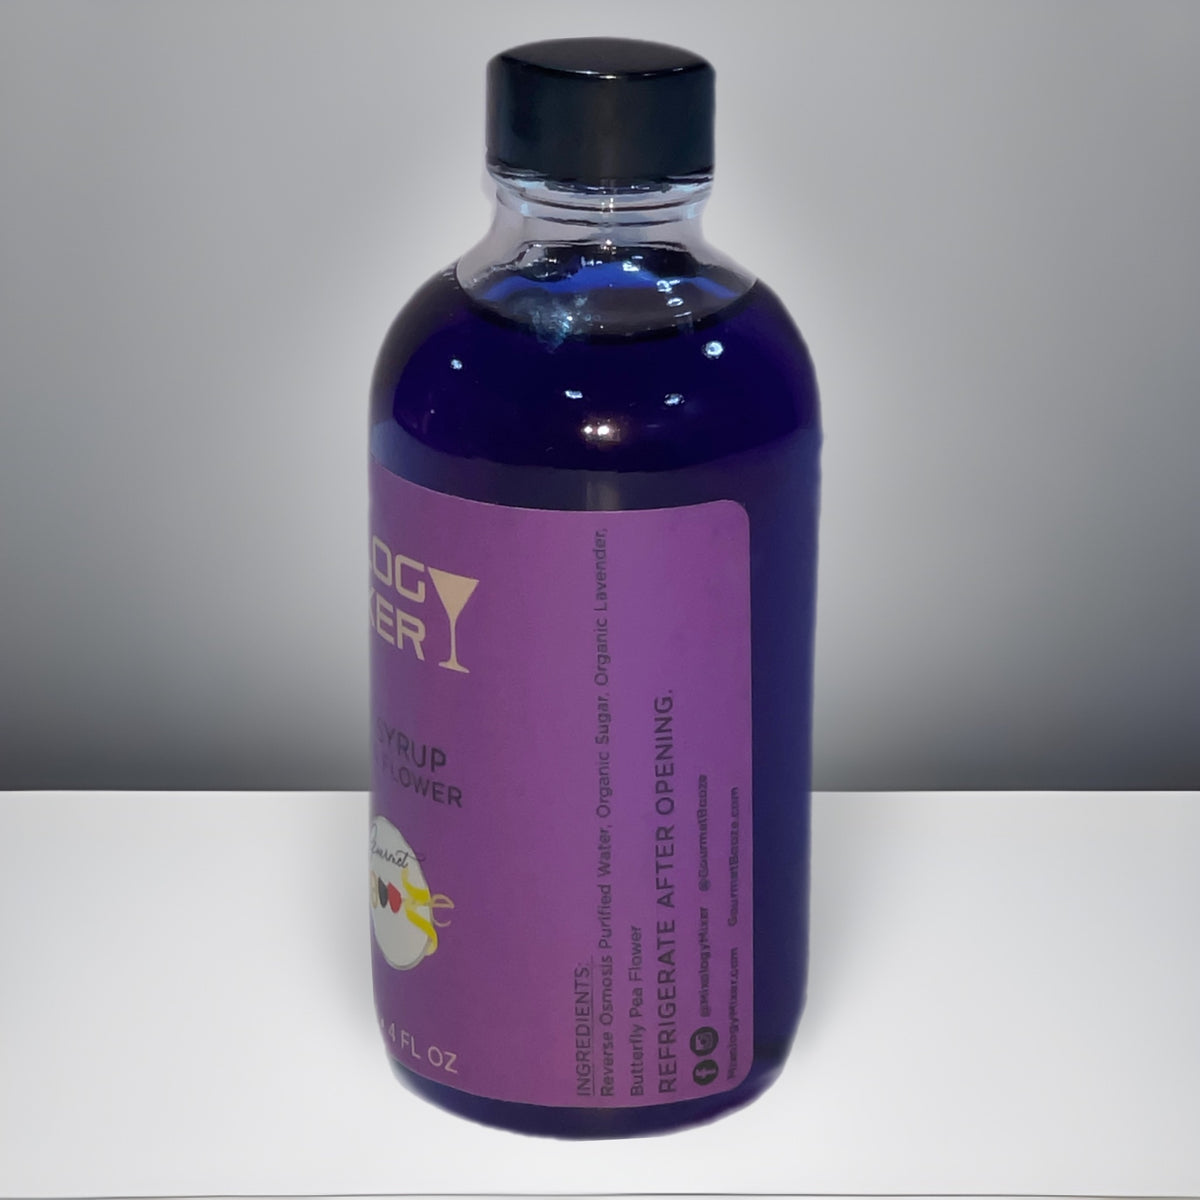 Lavender Syrup Butterfly Pea Flower